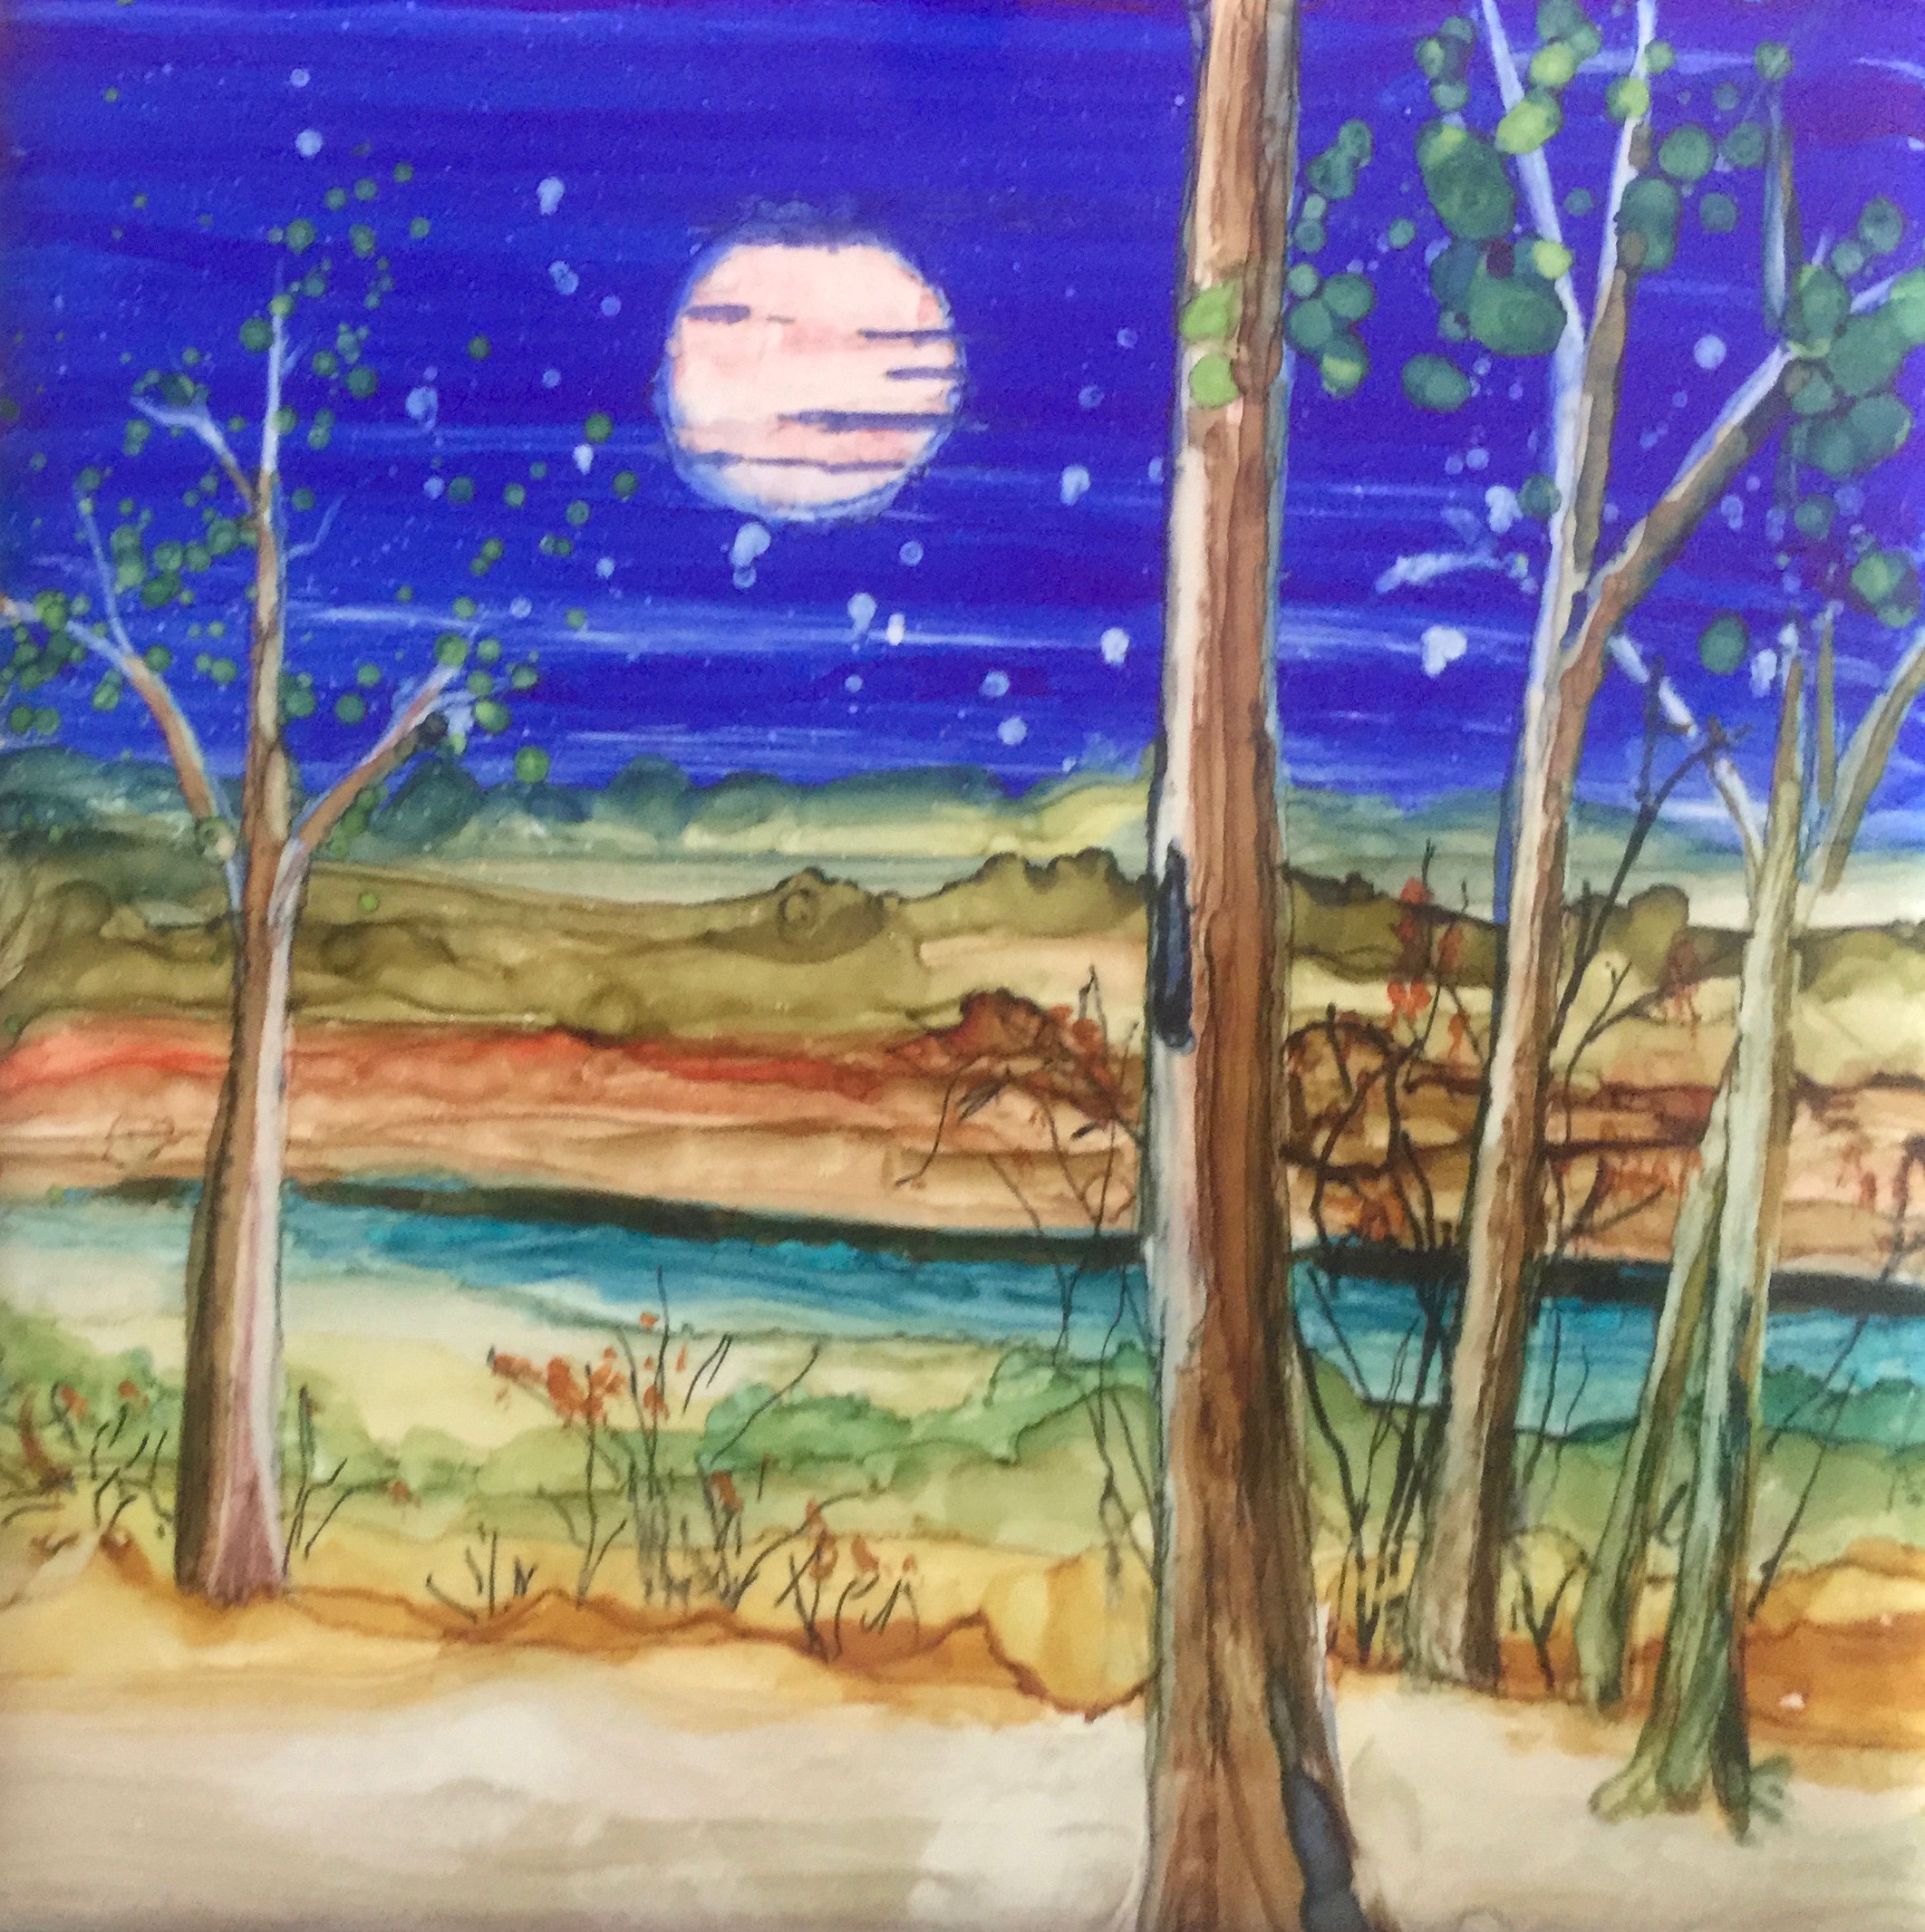 Hand Painted Ceramic Tile, by Jane Brennan, classes offered